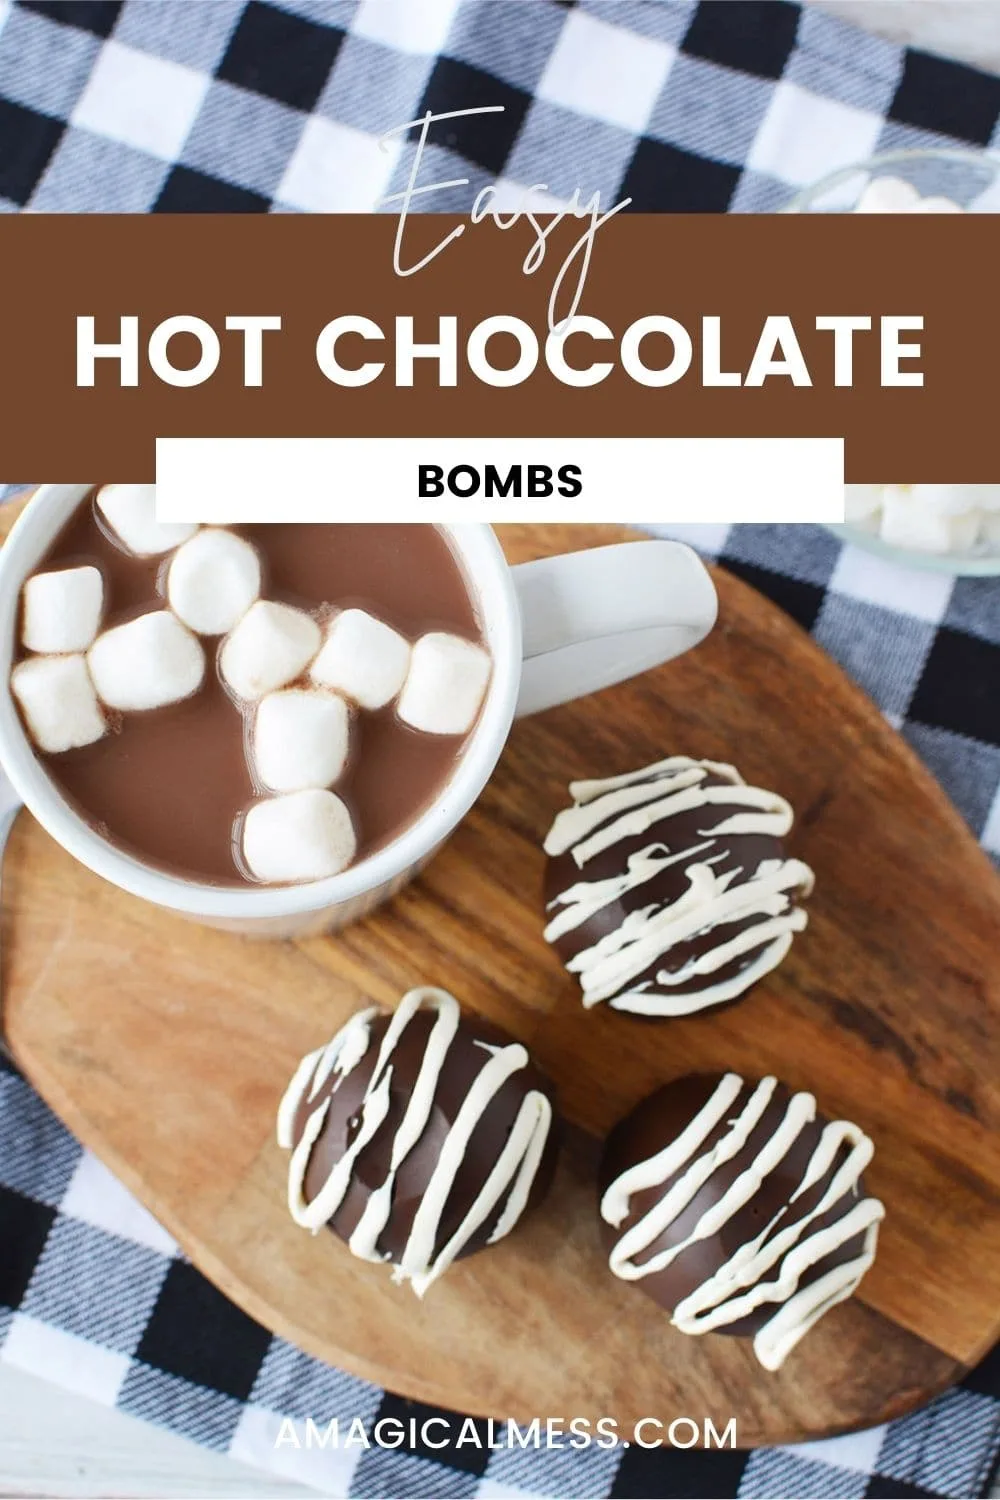 Hot chocolate bombs next to a mug of hot chocolate with marshmallows.